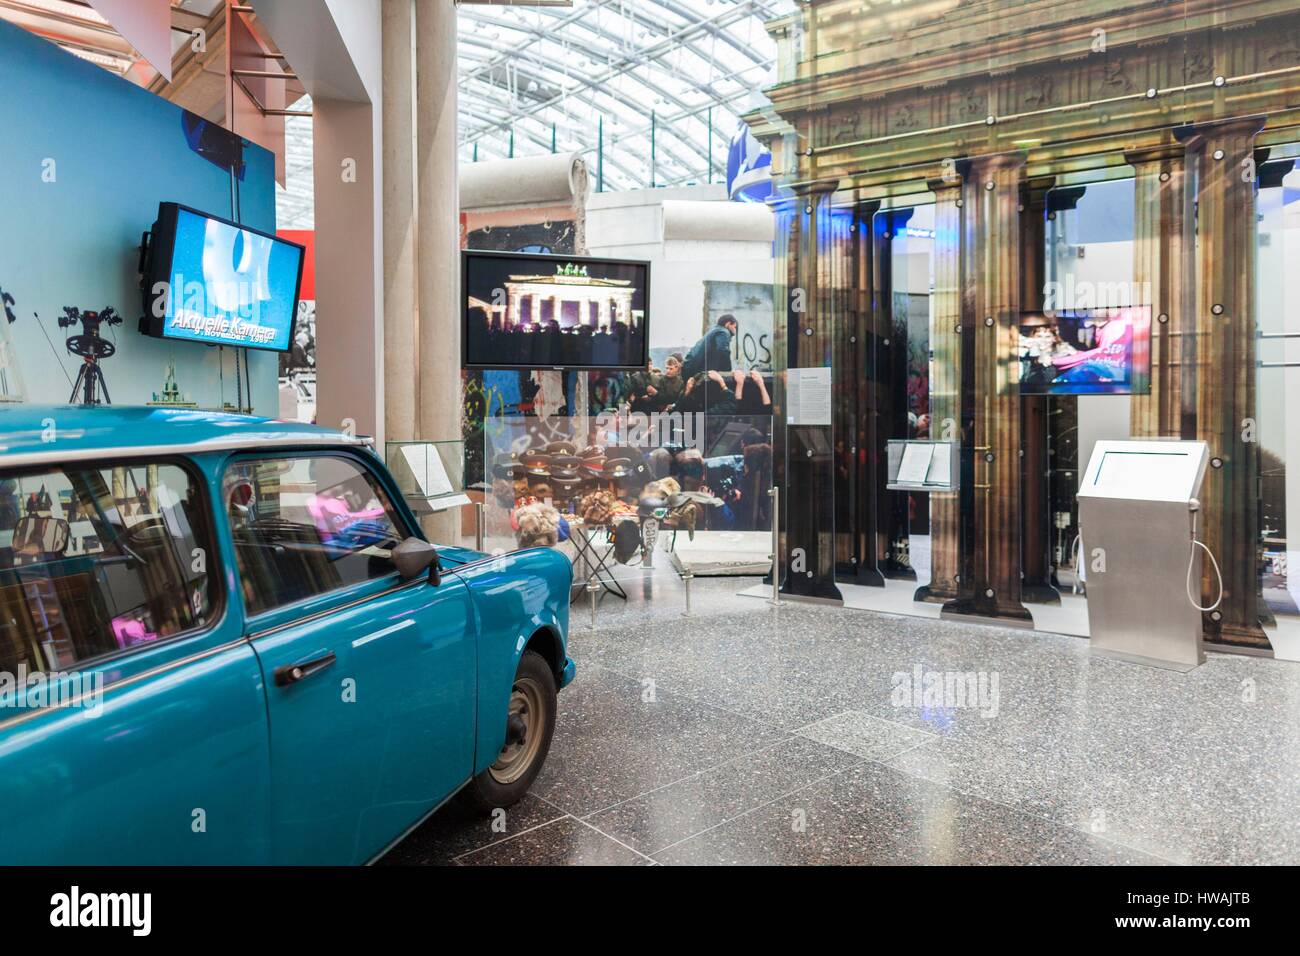 Germany, Nordrhein-Westfalen, Bonn, Museumsmeile, Museum of the Federal Republic of Germany, East German Trabant car Stock Photo